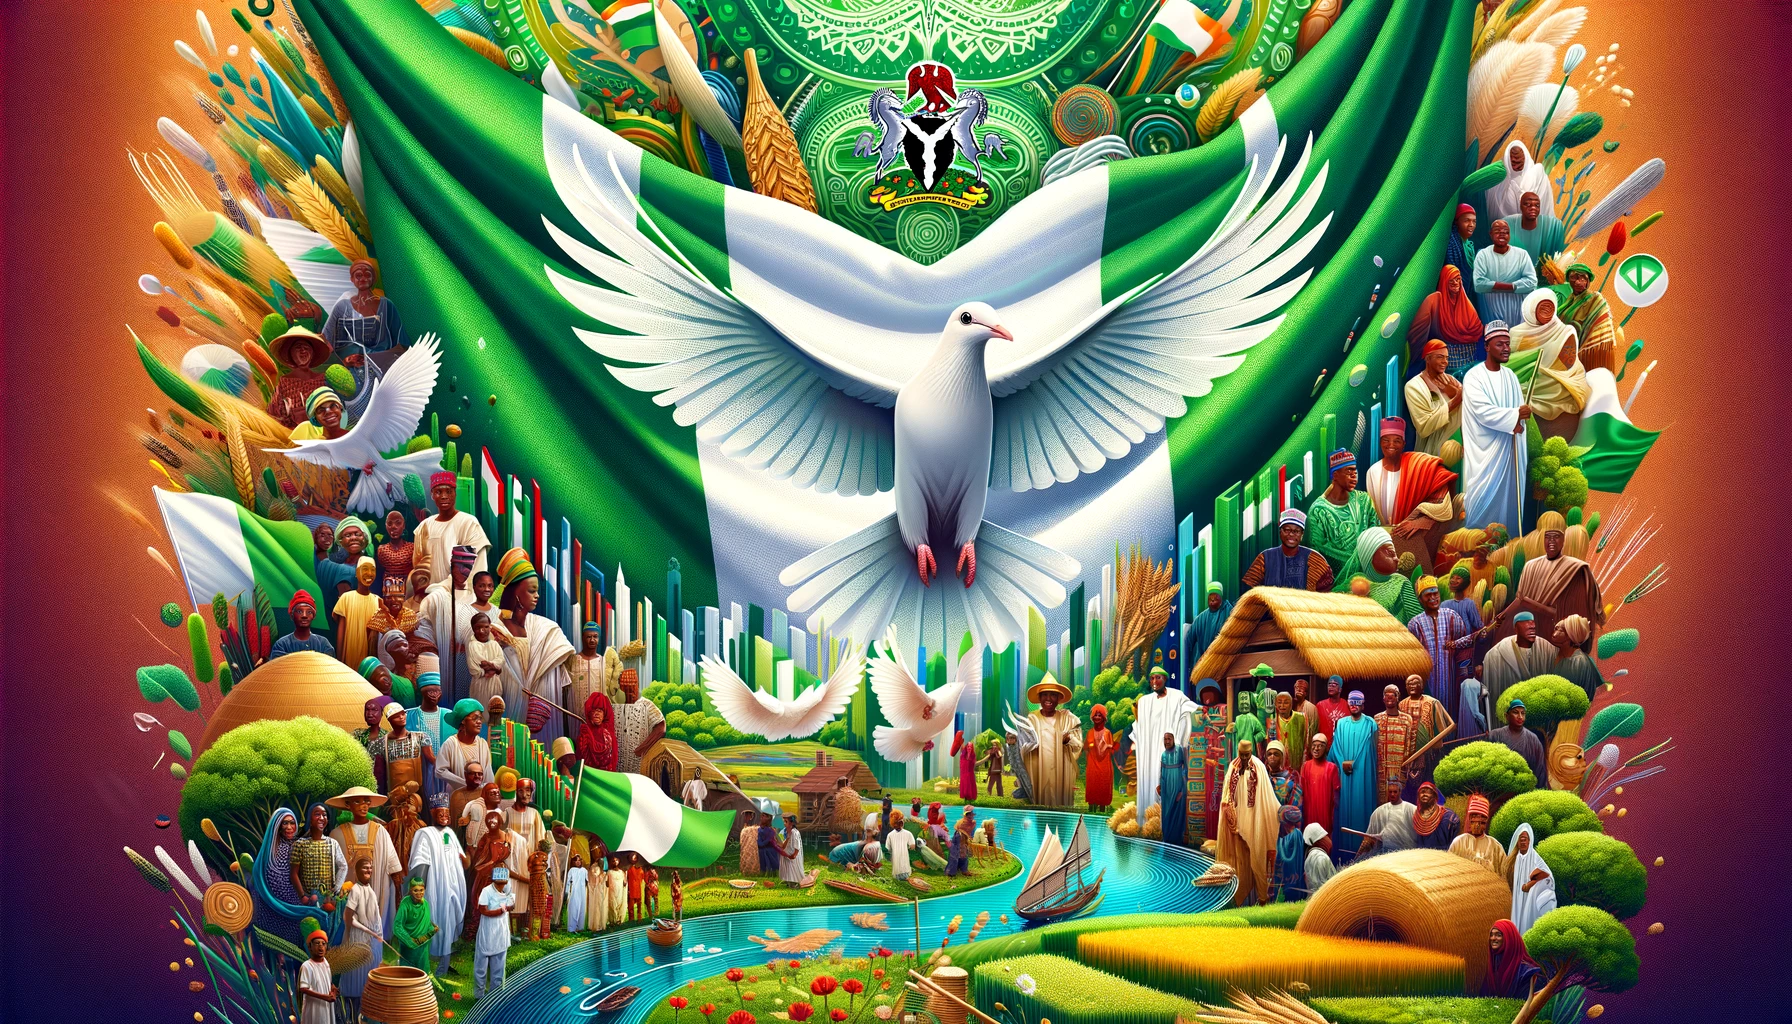 Nigeria Flag Meaning: Peace, Unity, and Prosperity